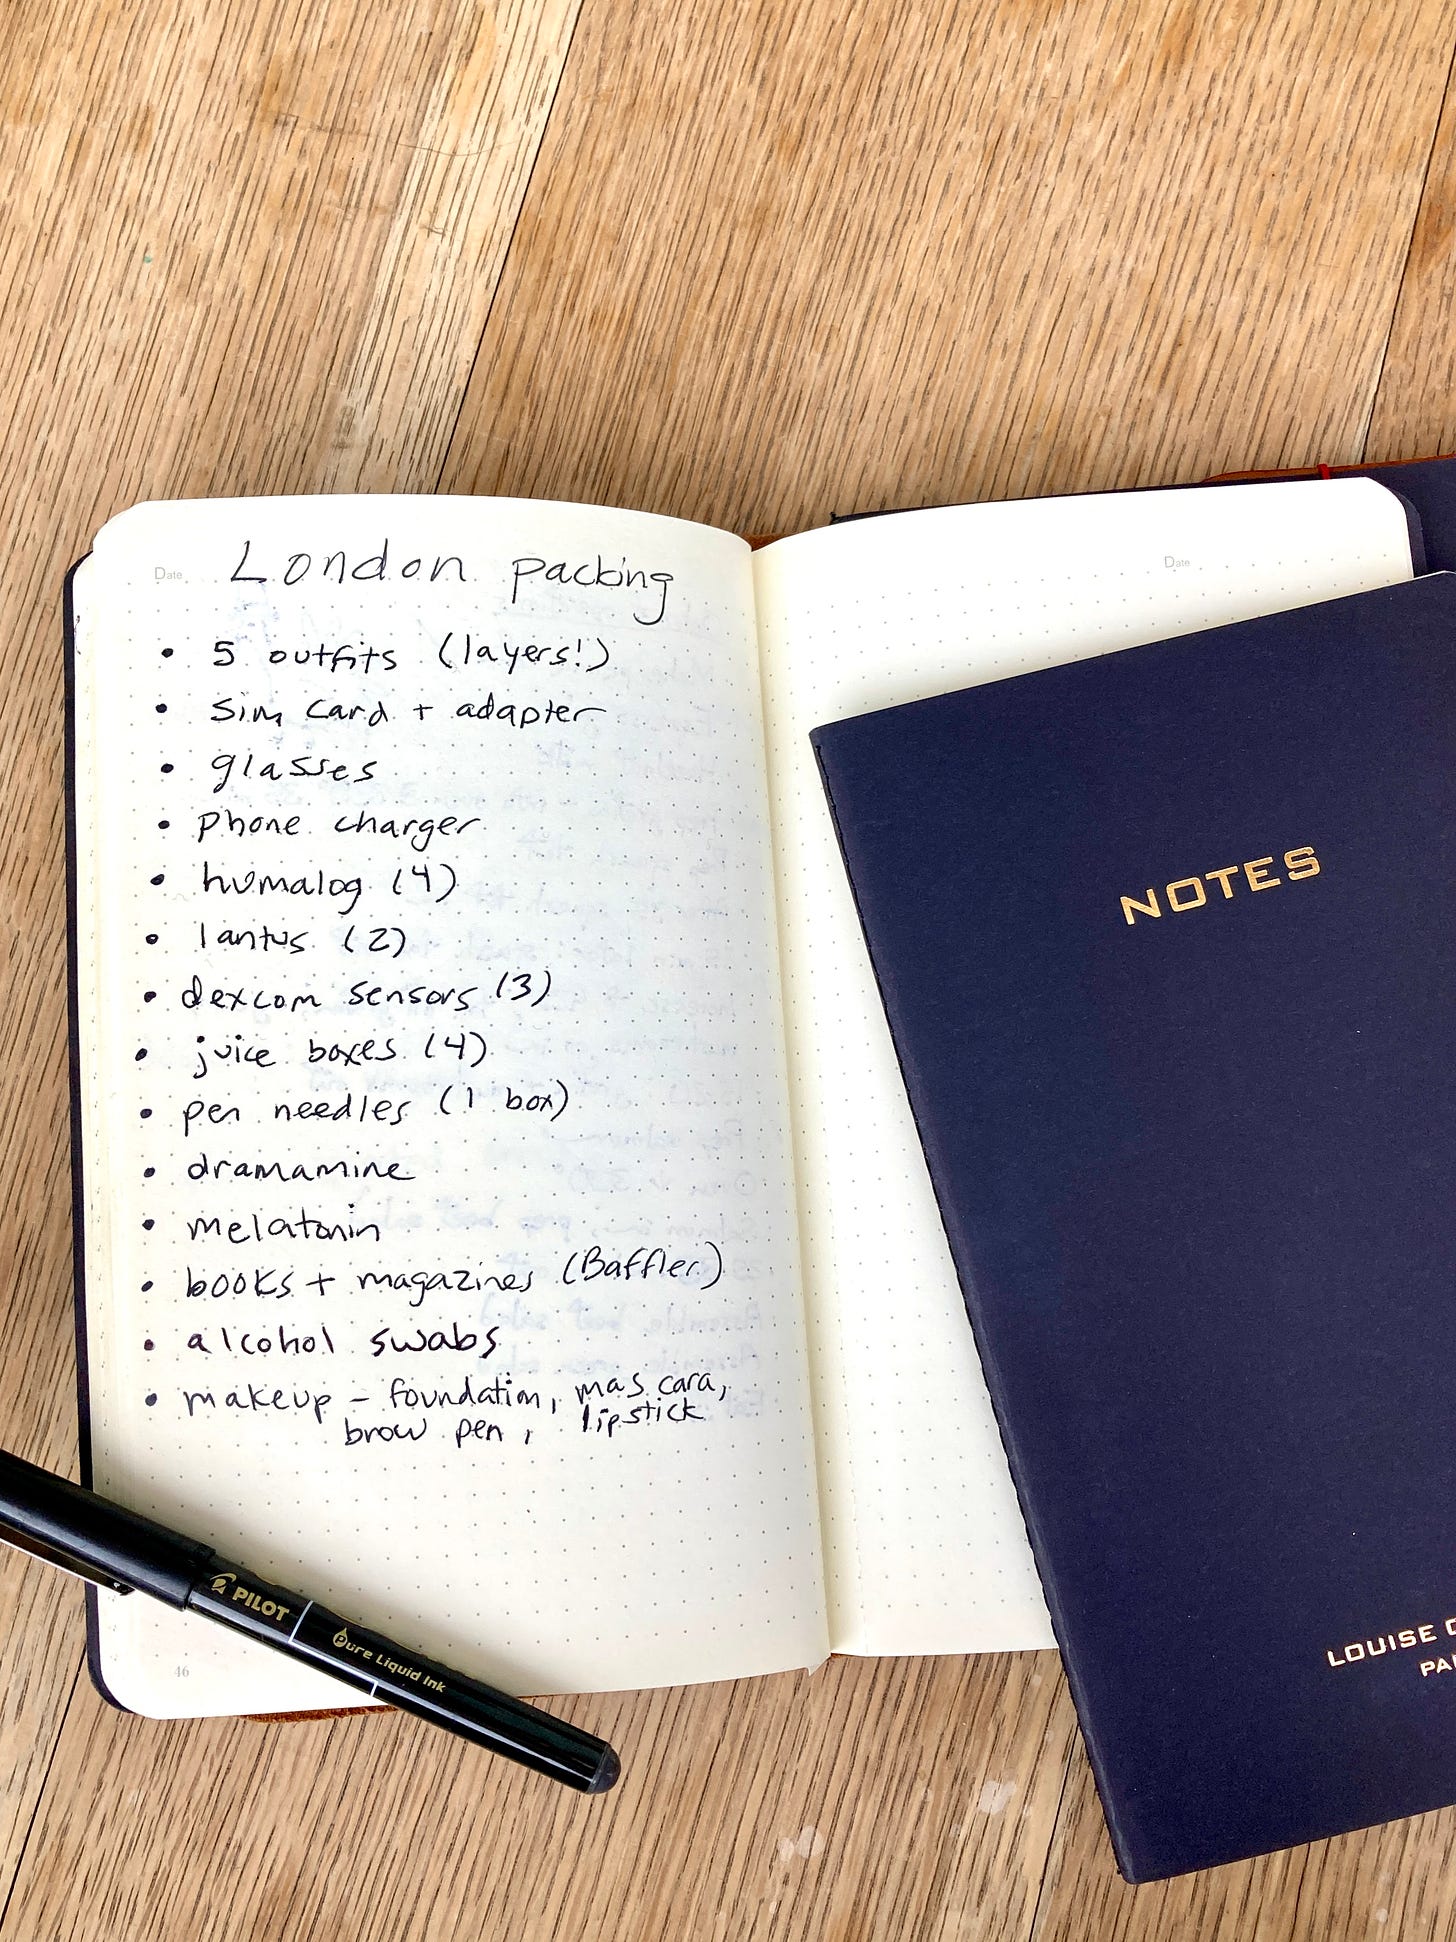 A notebook on an textured wood table. It is open and the left page is titled "London Packing." The page has items listed in bullets, including clothing, medicine, make-up, and other essentials.